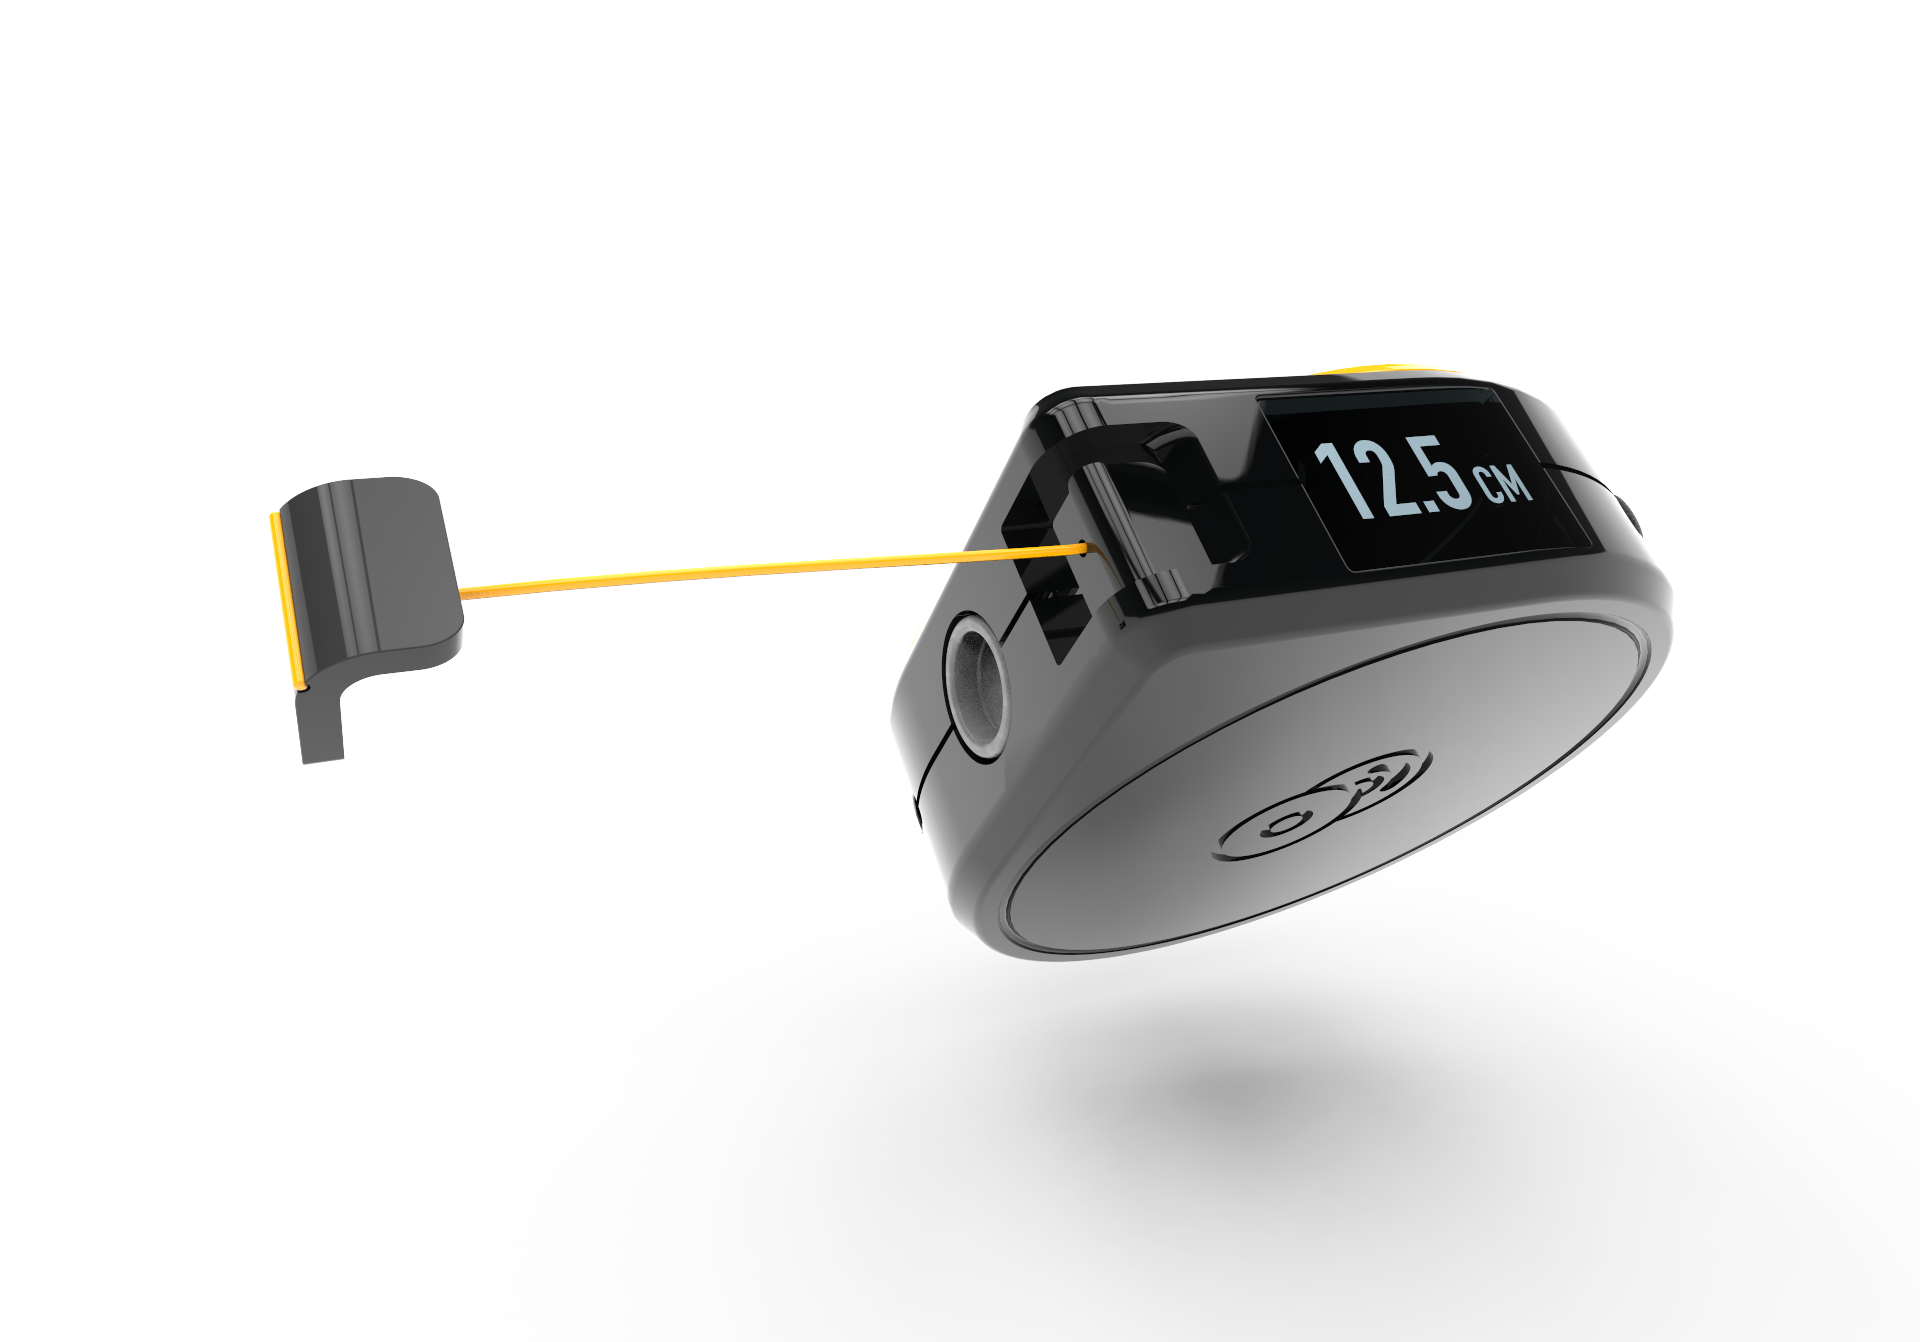 Cool Tools: New Smart Tape Measure is All of Your Favorite